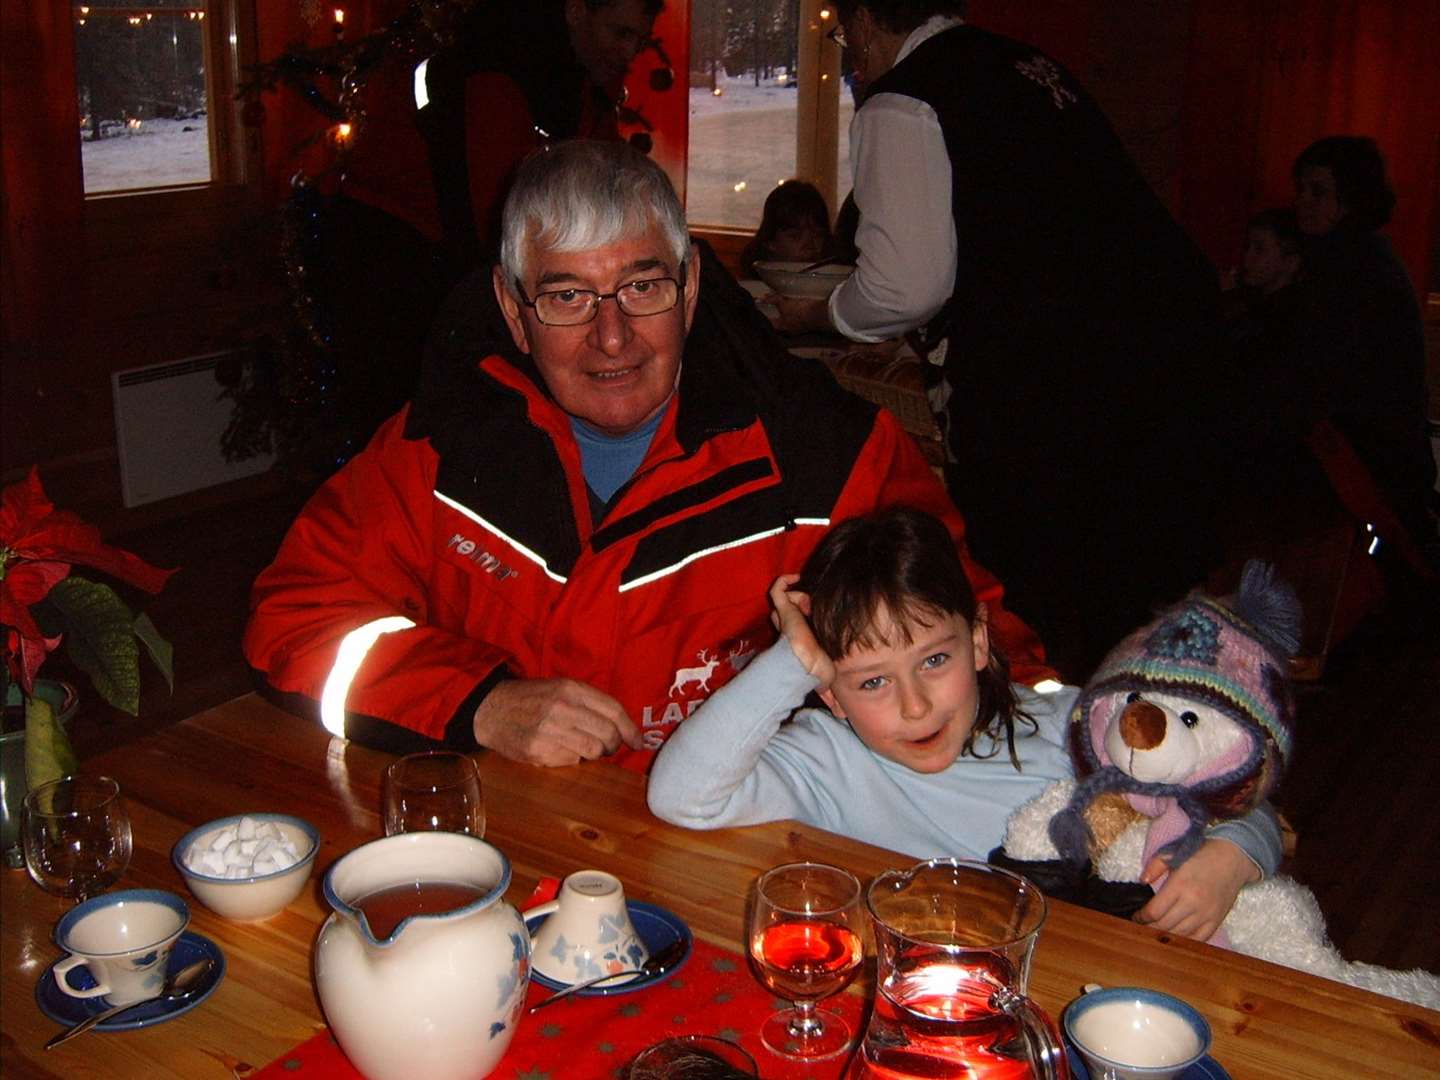 Jenna Rattray with her late granda, former Burghead police officer Alan Rattray, on a Christmas trip to Lapland back in 2006.